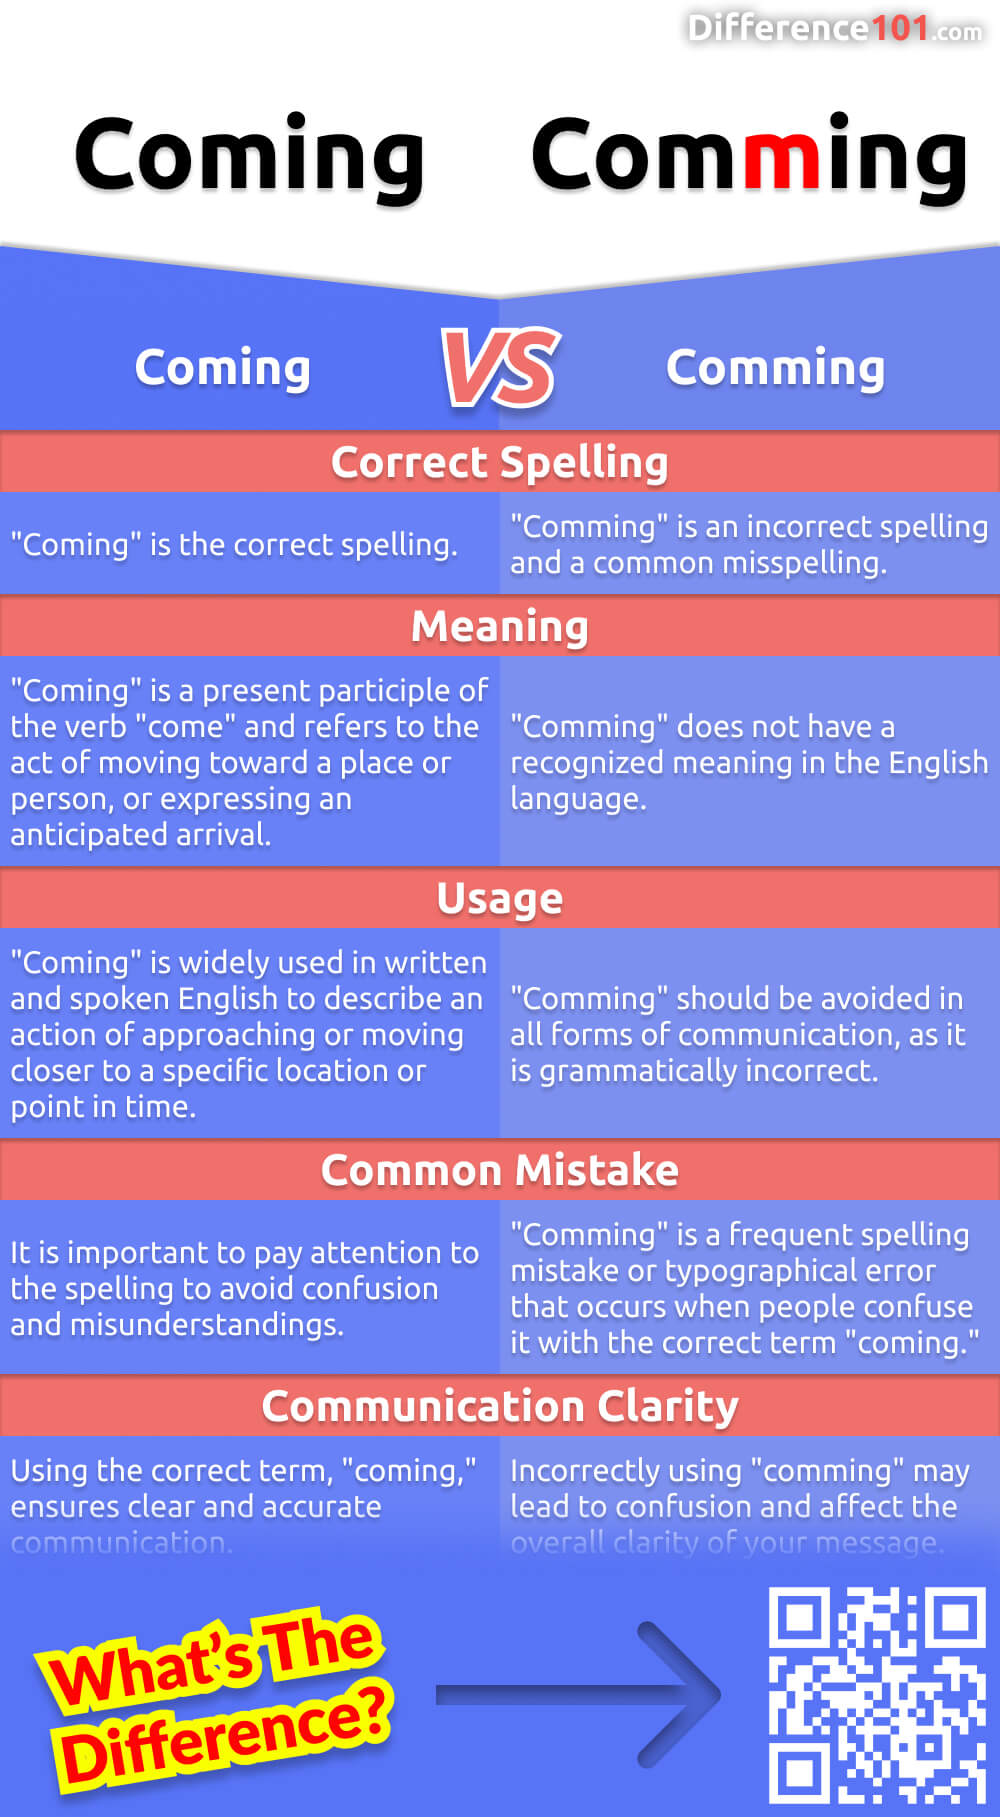 Do you know the key differences between "coming" and the commonly misspelled "comming"? We explain their meanings and the pros and cons of correct usage, ensuring you communicate effectively.